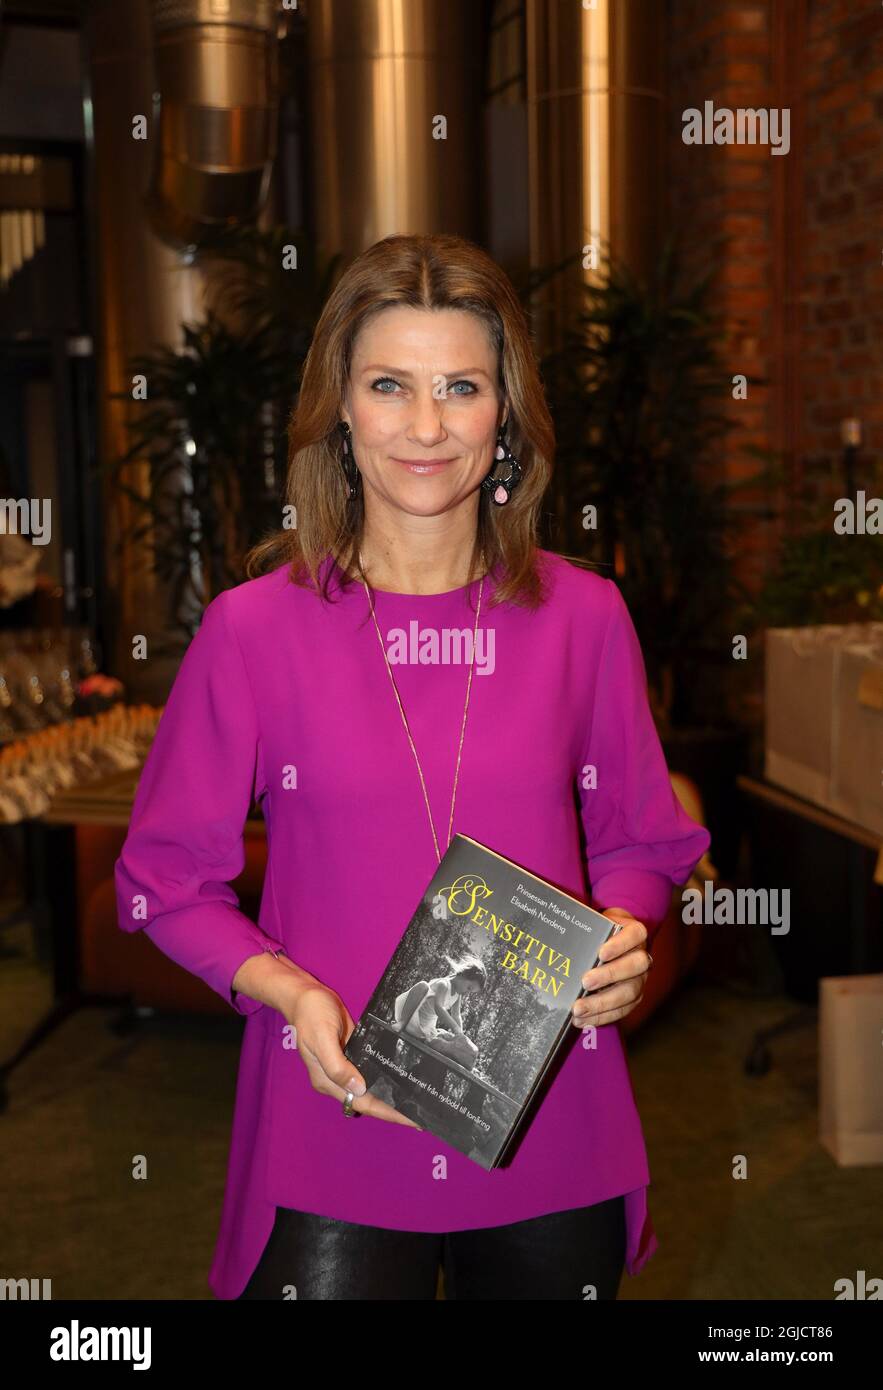 Princess Martha Louise of Norway during an interview in Stockholm Sweden November 20, 2019 in which she promoted her new book ”Born sensitive". Photo Hans Shimoda / TT Kod 2568  Stock Photo